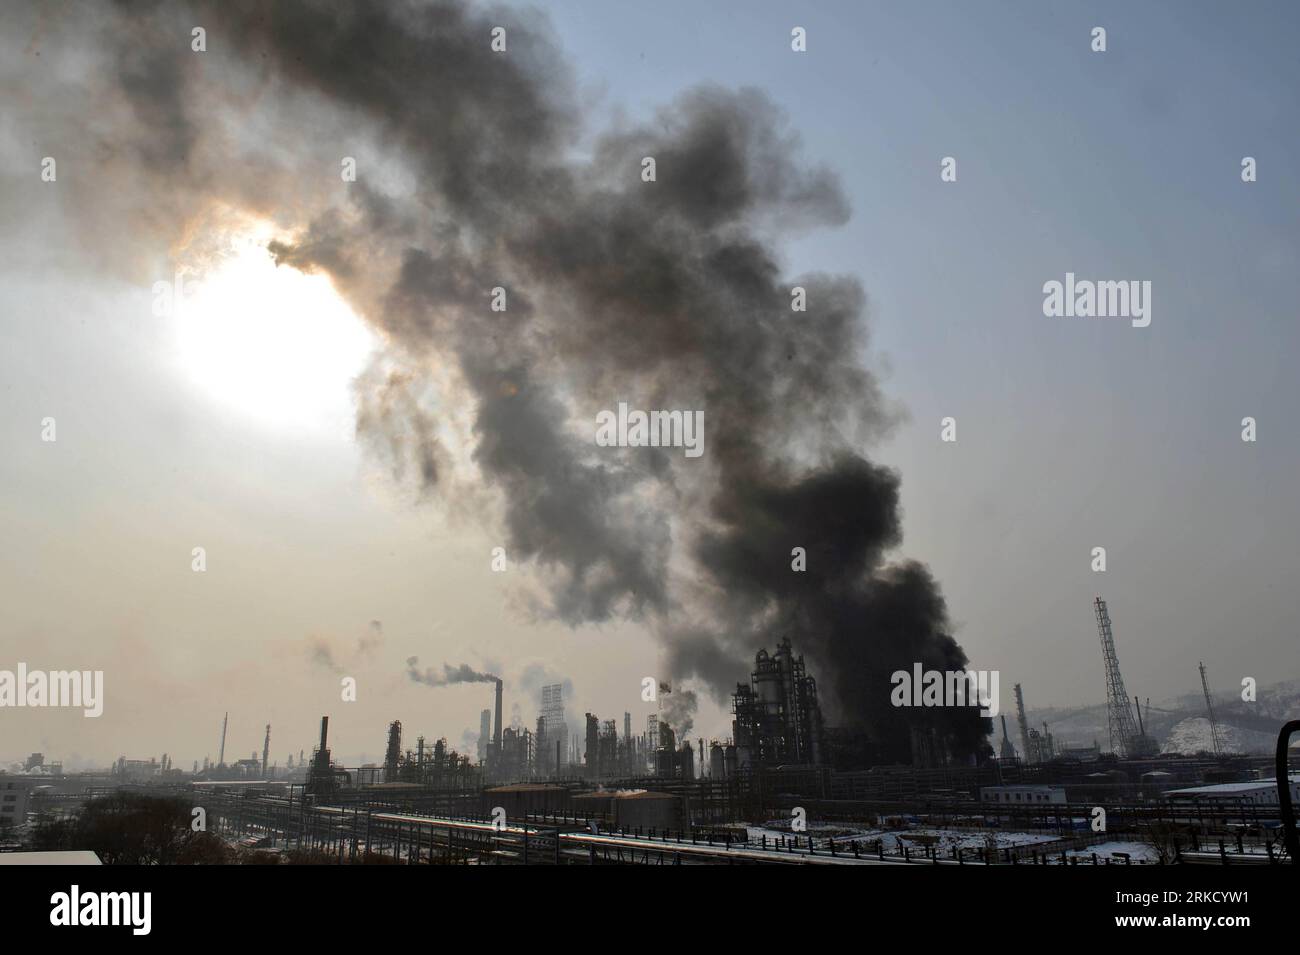 Bildnummer: 54830023  Datum: 19.01.2011  Copyright: imago/Xinhua FUSHUN, Jan. 19, 2011 (Xinhua) -- Smoke rises from the site where an explosion occurred at a refinery of Fushun Petrochemical Company in Fushun, northeast China s Liaoning Province, Jan. 19, 2011. Firefighters have brought the fire under control, eliminating the possibility of secondary explosions. No casualties have been reported so far. (Xinhua/Yao Jianfeng) (hdt) CHINA-FUSHUN-OIL REFINERY-EXPLOSION (CN) PUBLICATIONxNOTxINxCHN Wirtschaft Fabrik petrochemische Industrie Chemiefabrik Raffinerie Öl Ölraffinerie Explosion Unglück k Stock Photo